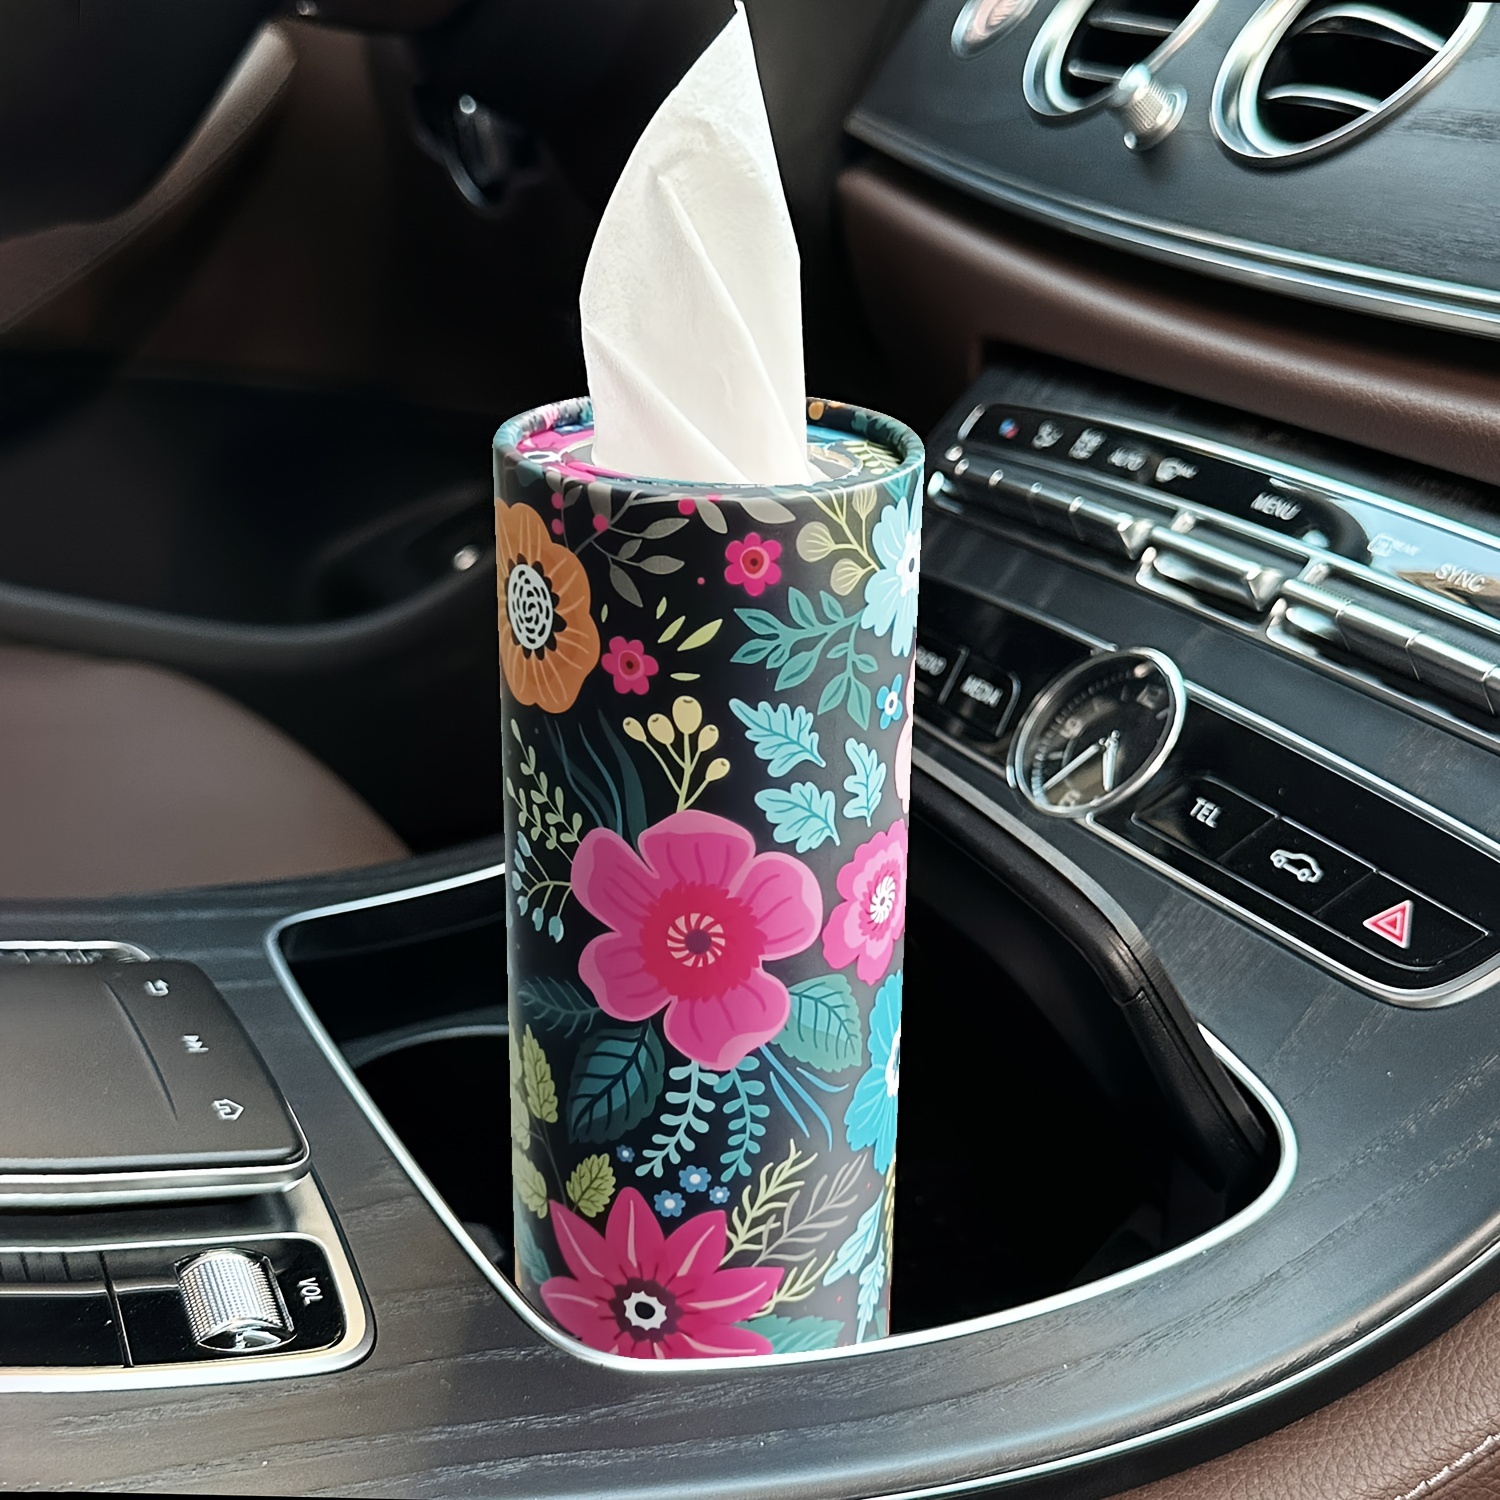 

1pc Pink Beauty Flowers Car Tissues Box With Facial Tissues - Womens Travel Tissue Cylinder Tubes For Car Cup Holder, Round Tissue Case For Home Dining Table